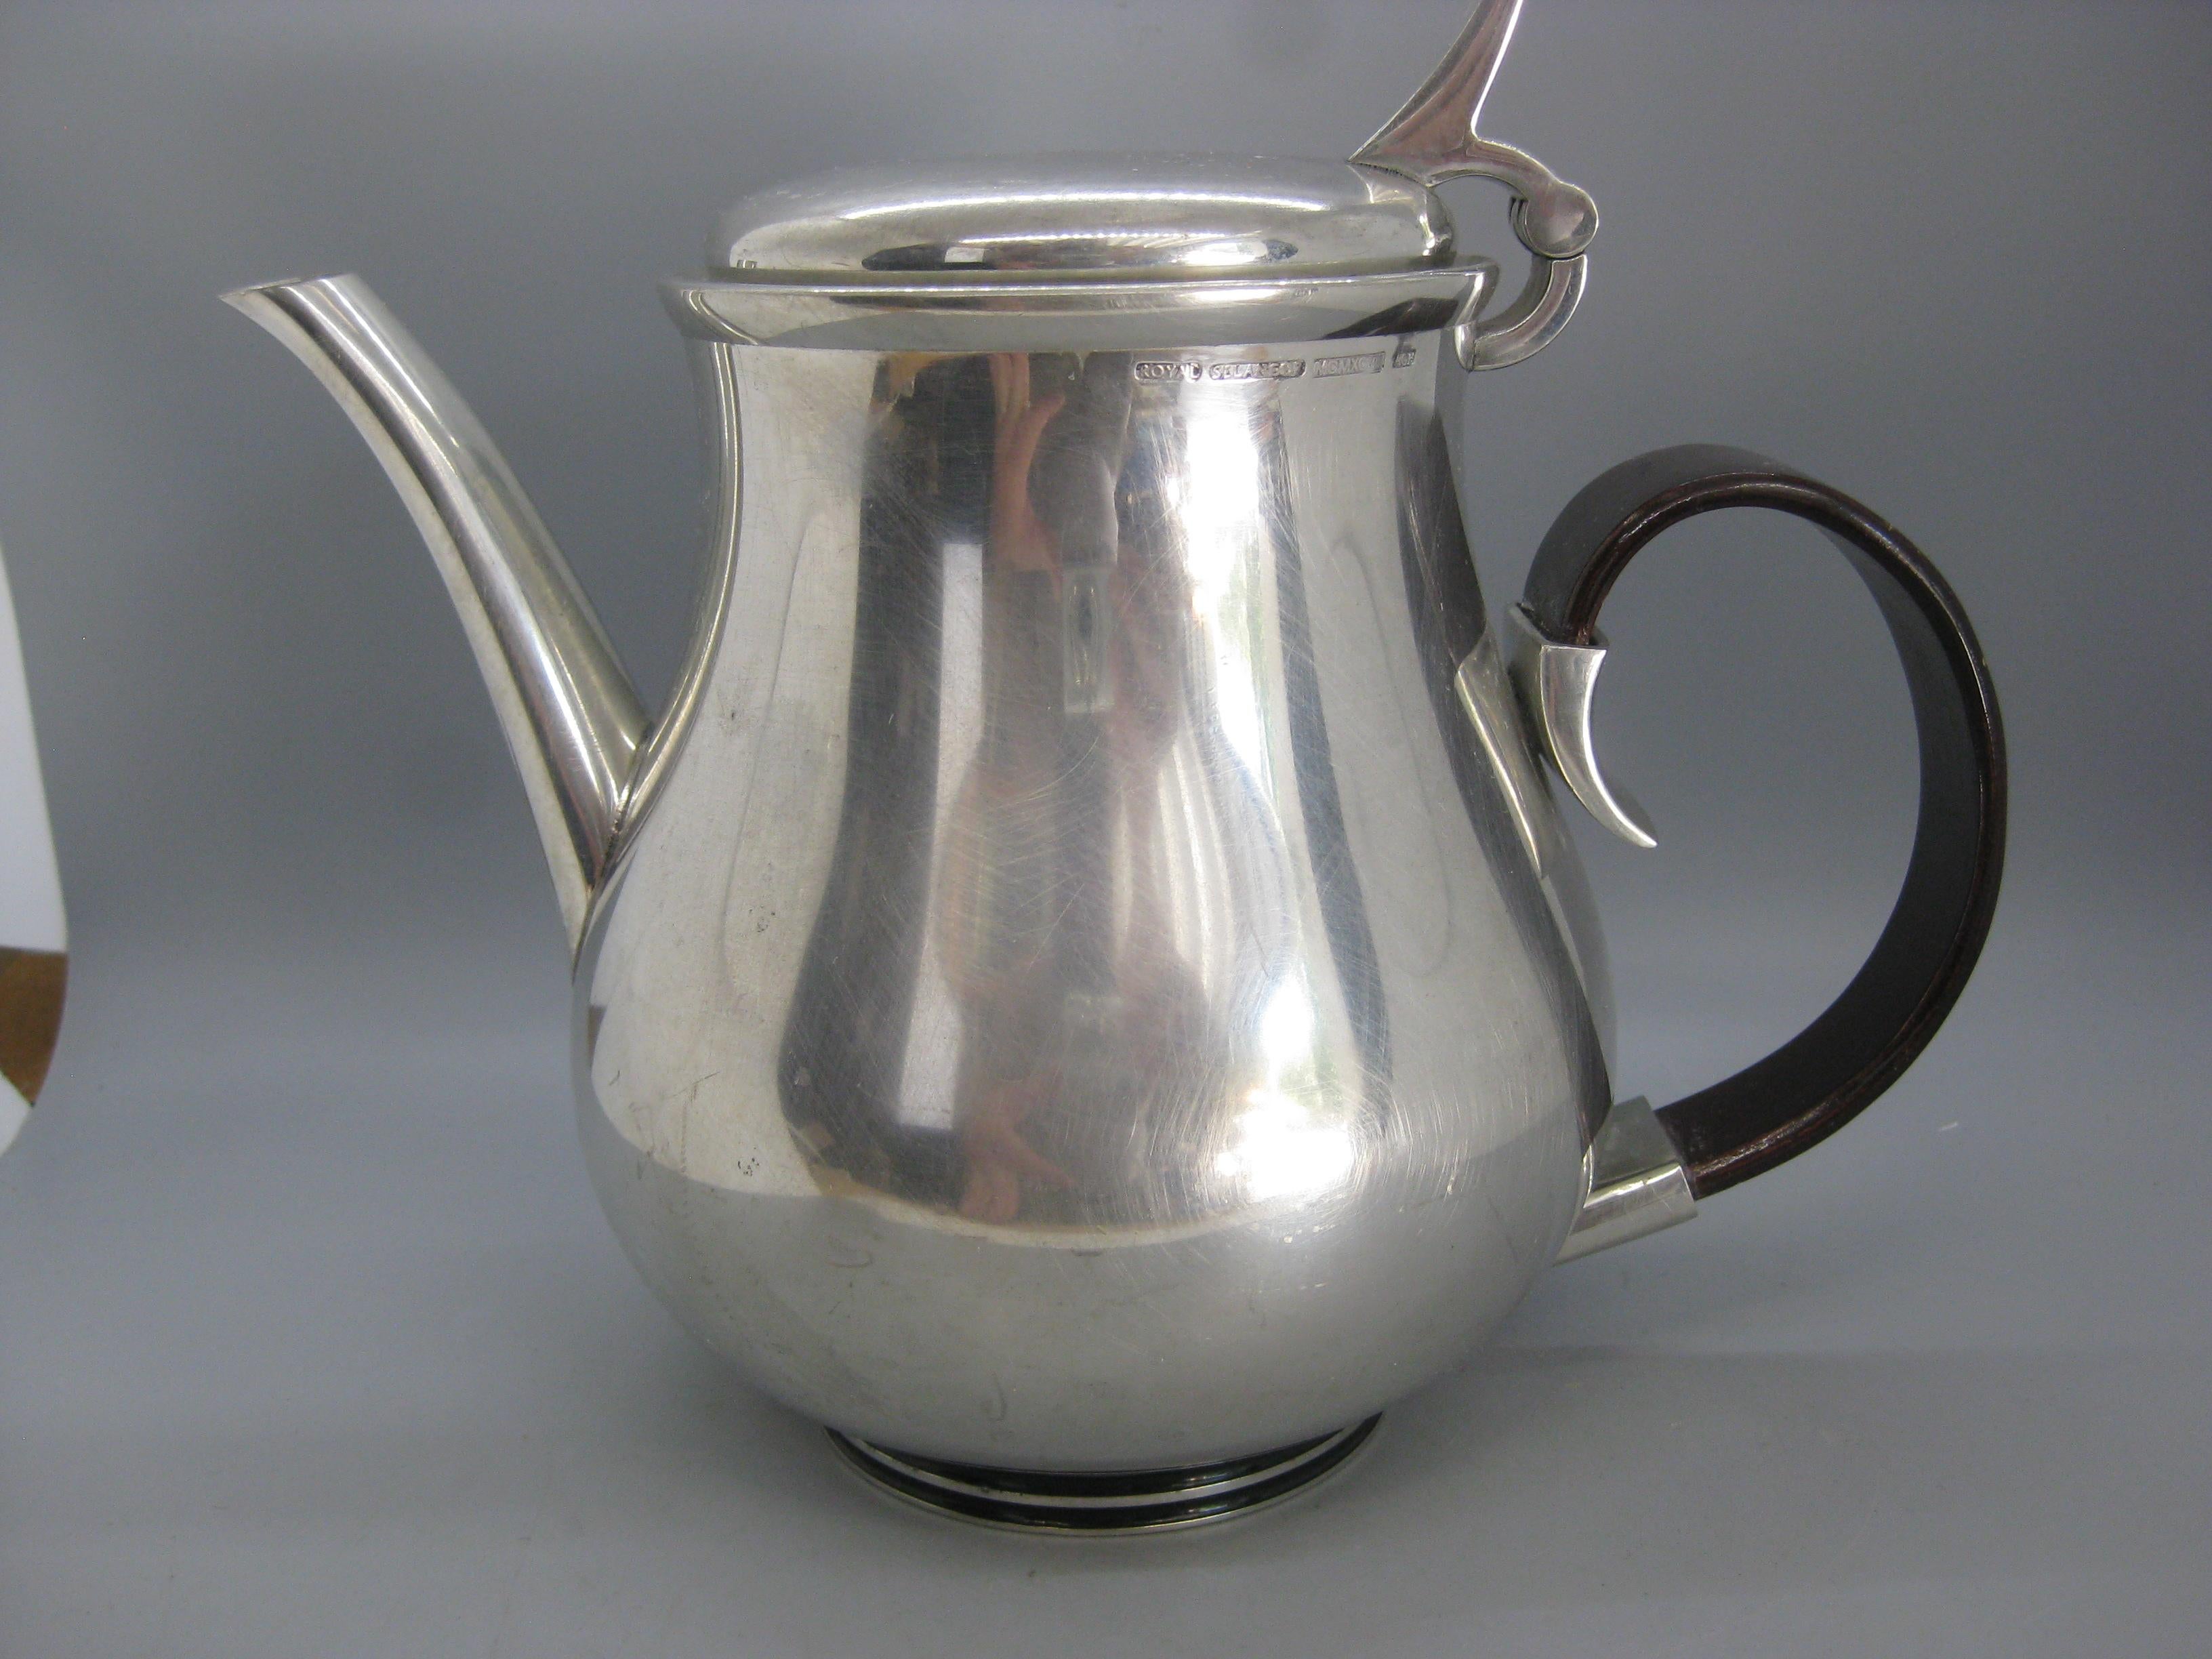 Wonderful vintage mid century designed Royal Selangor tea pot. Designed by Gerald Benney during the 1960's. This tea pot dates from the early 1990's. Wonderful form and design. Has a bent rosewood handle. The tea pot is made of solid pewter. In nice